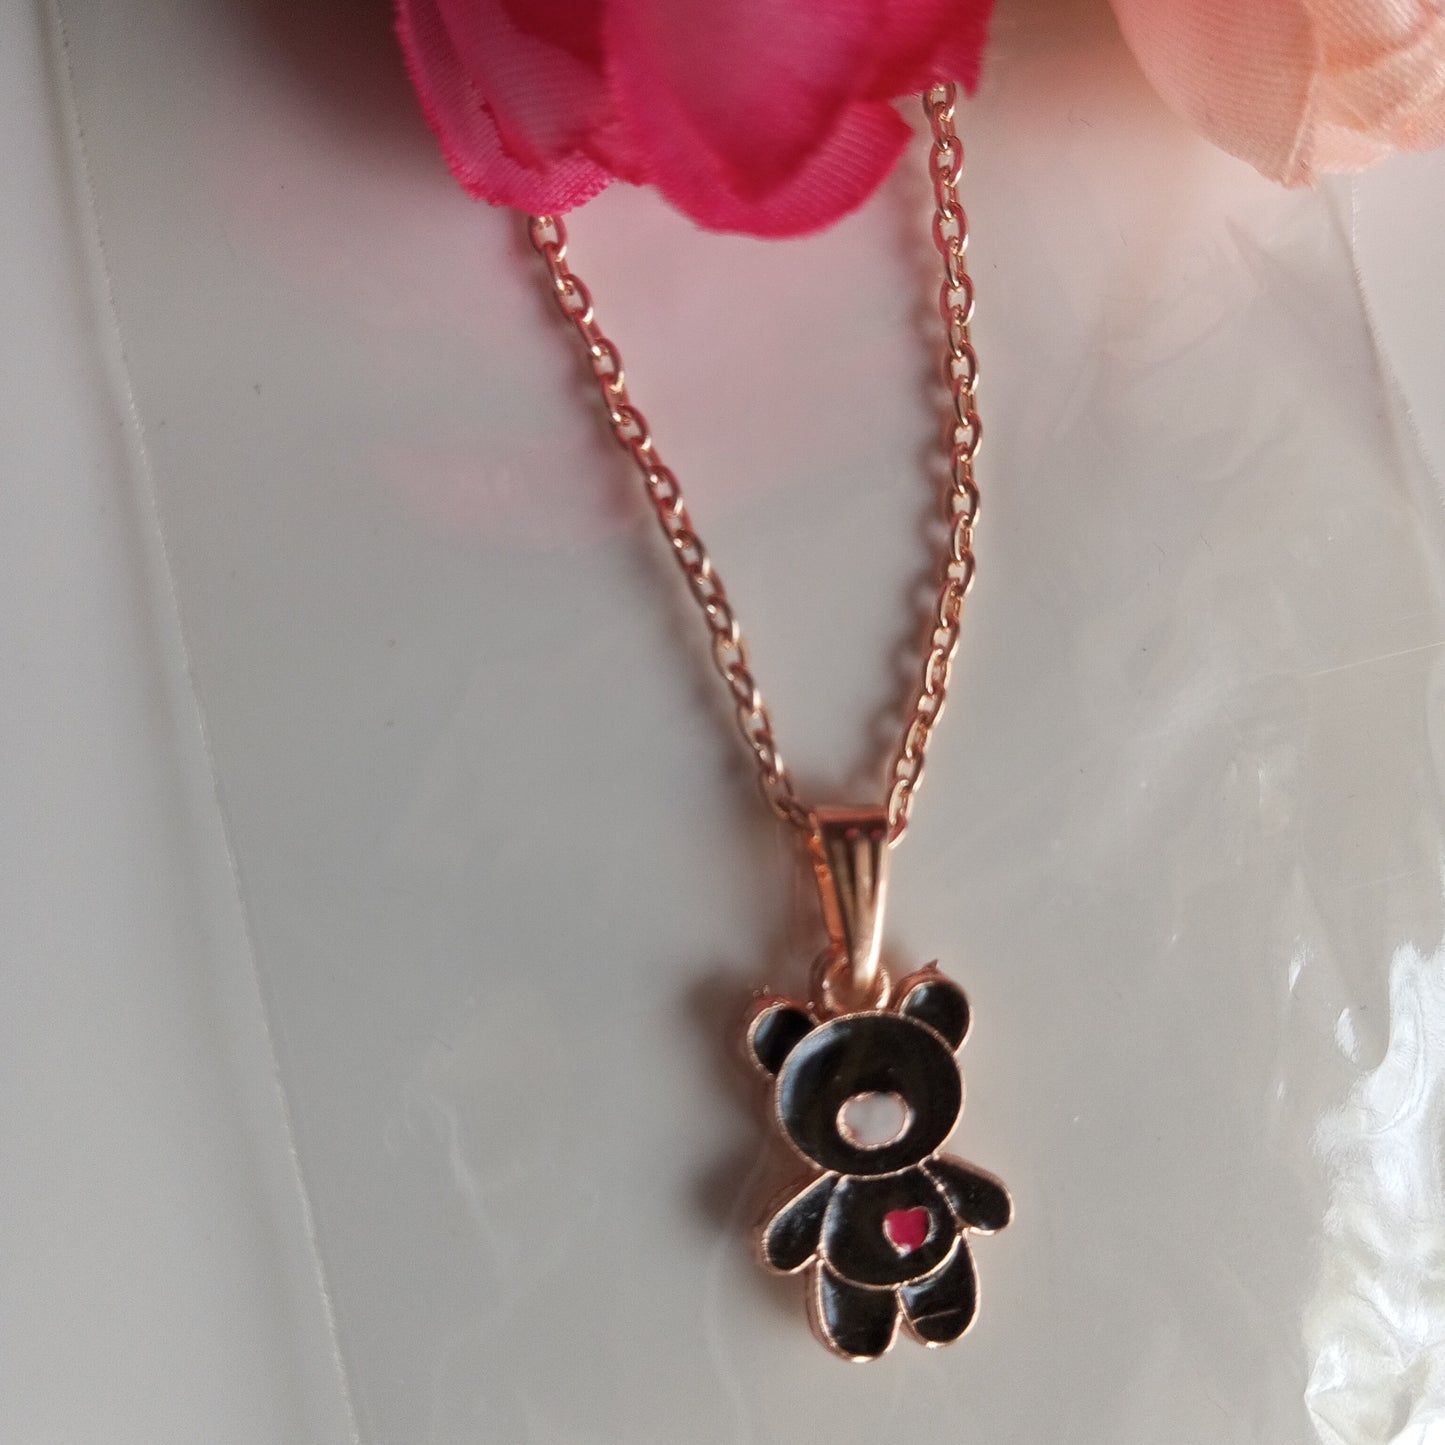 Chain with Pendant- Teddy